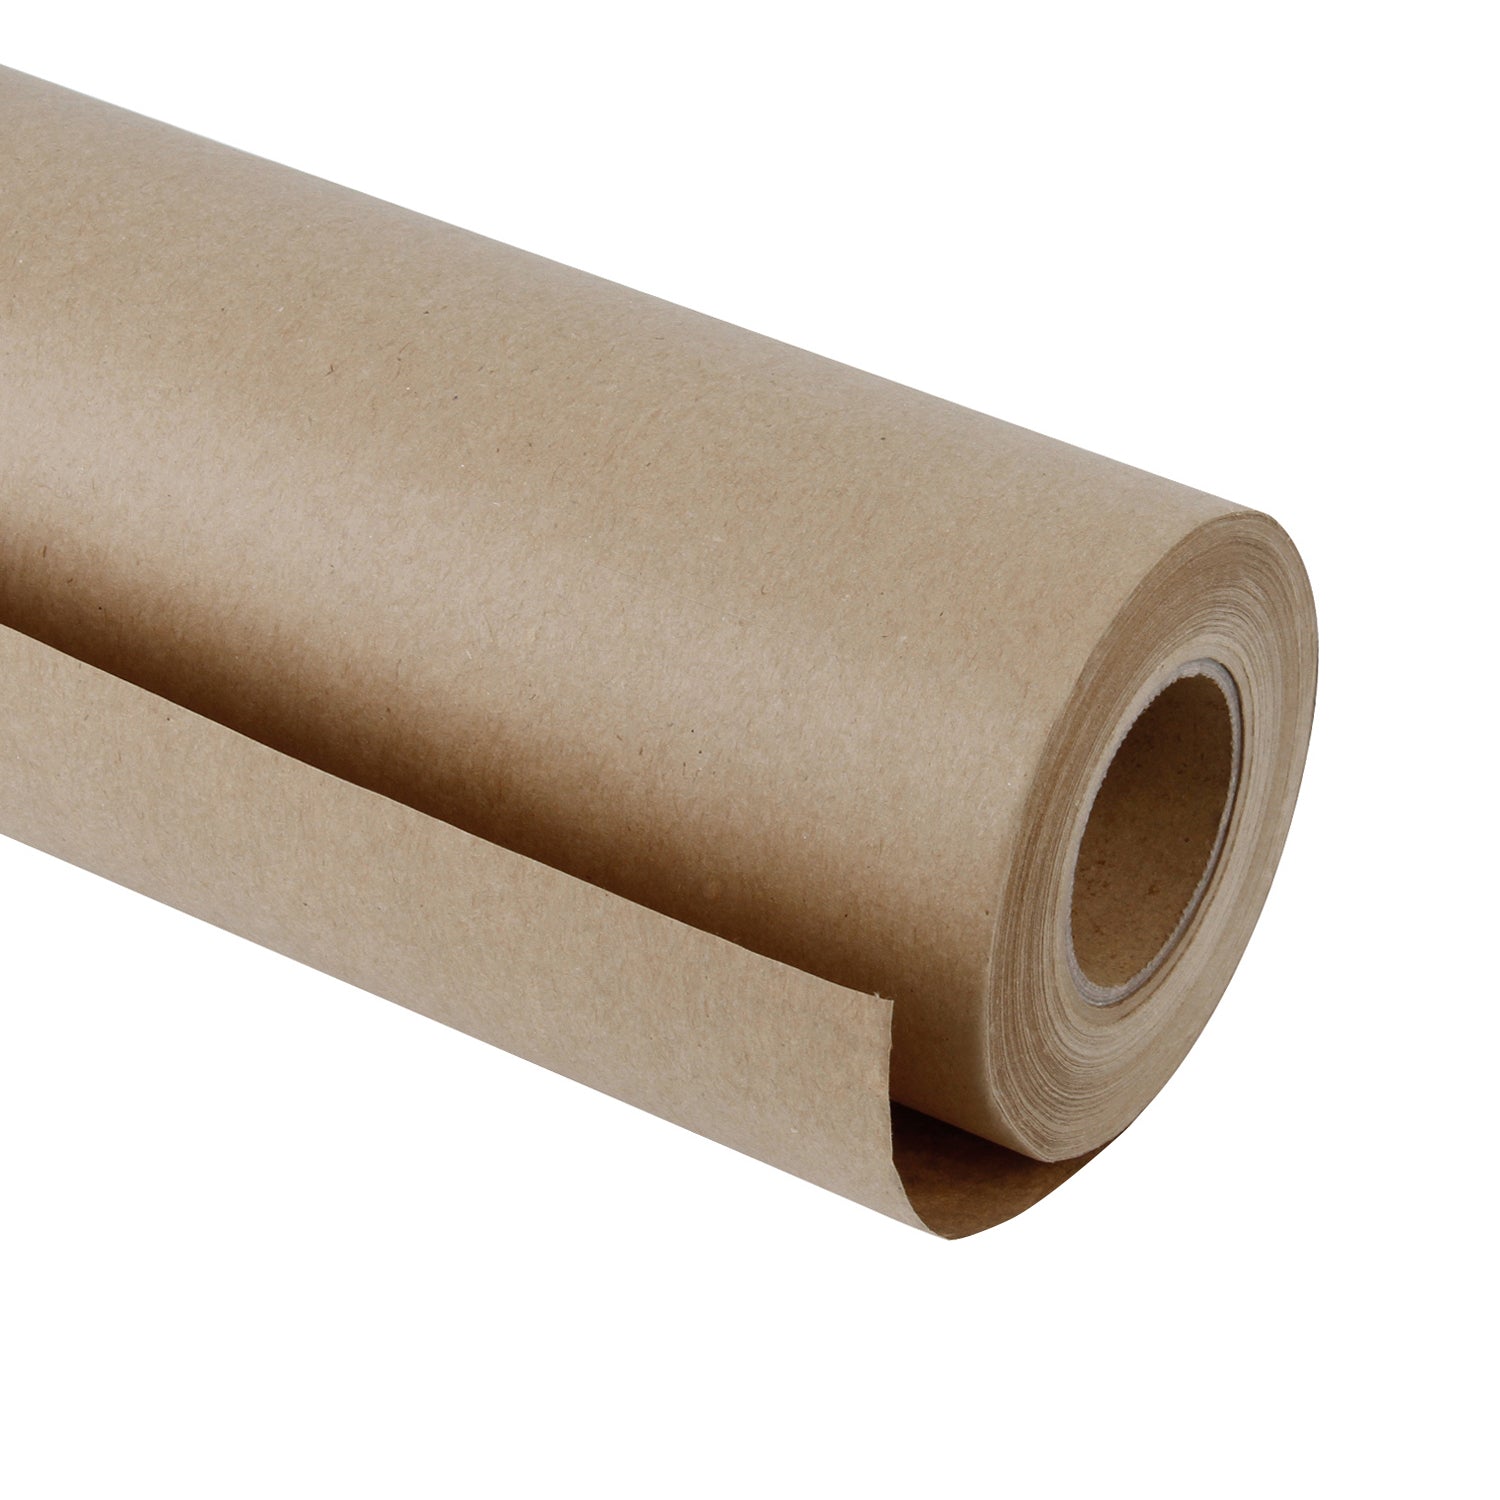 12 inch Tabletop Paper Roll